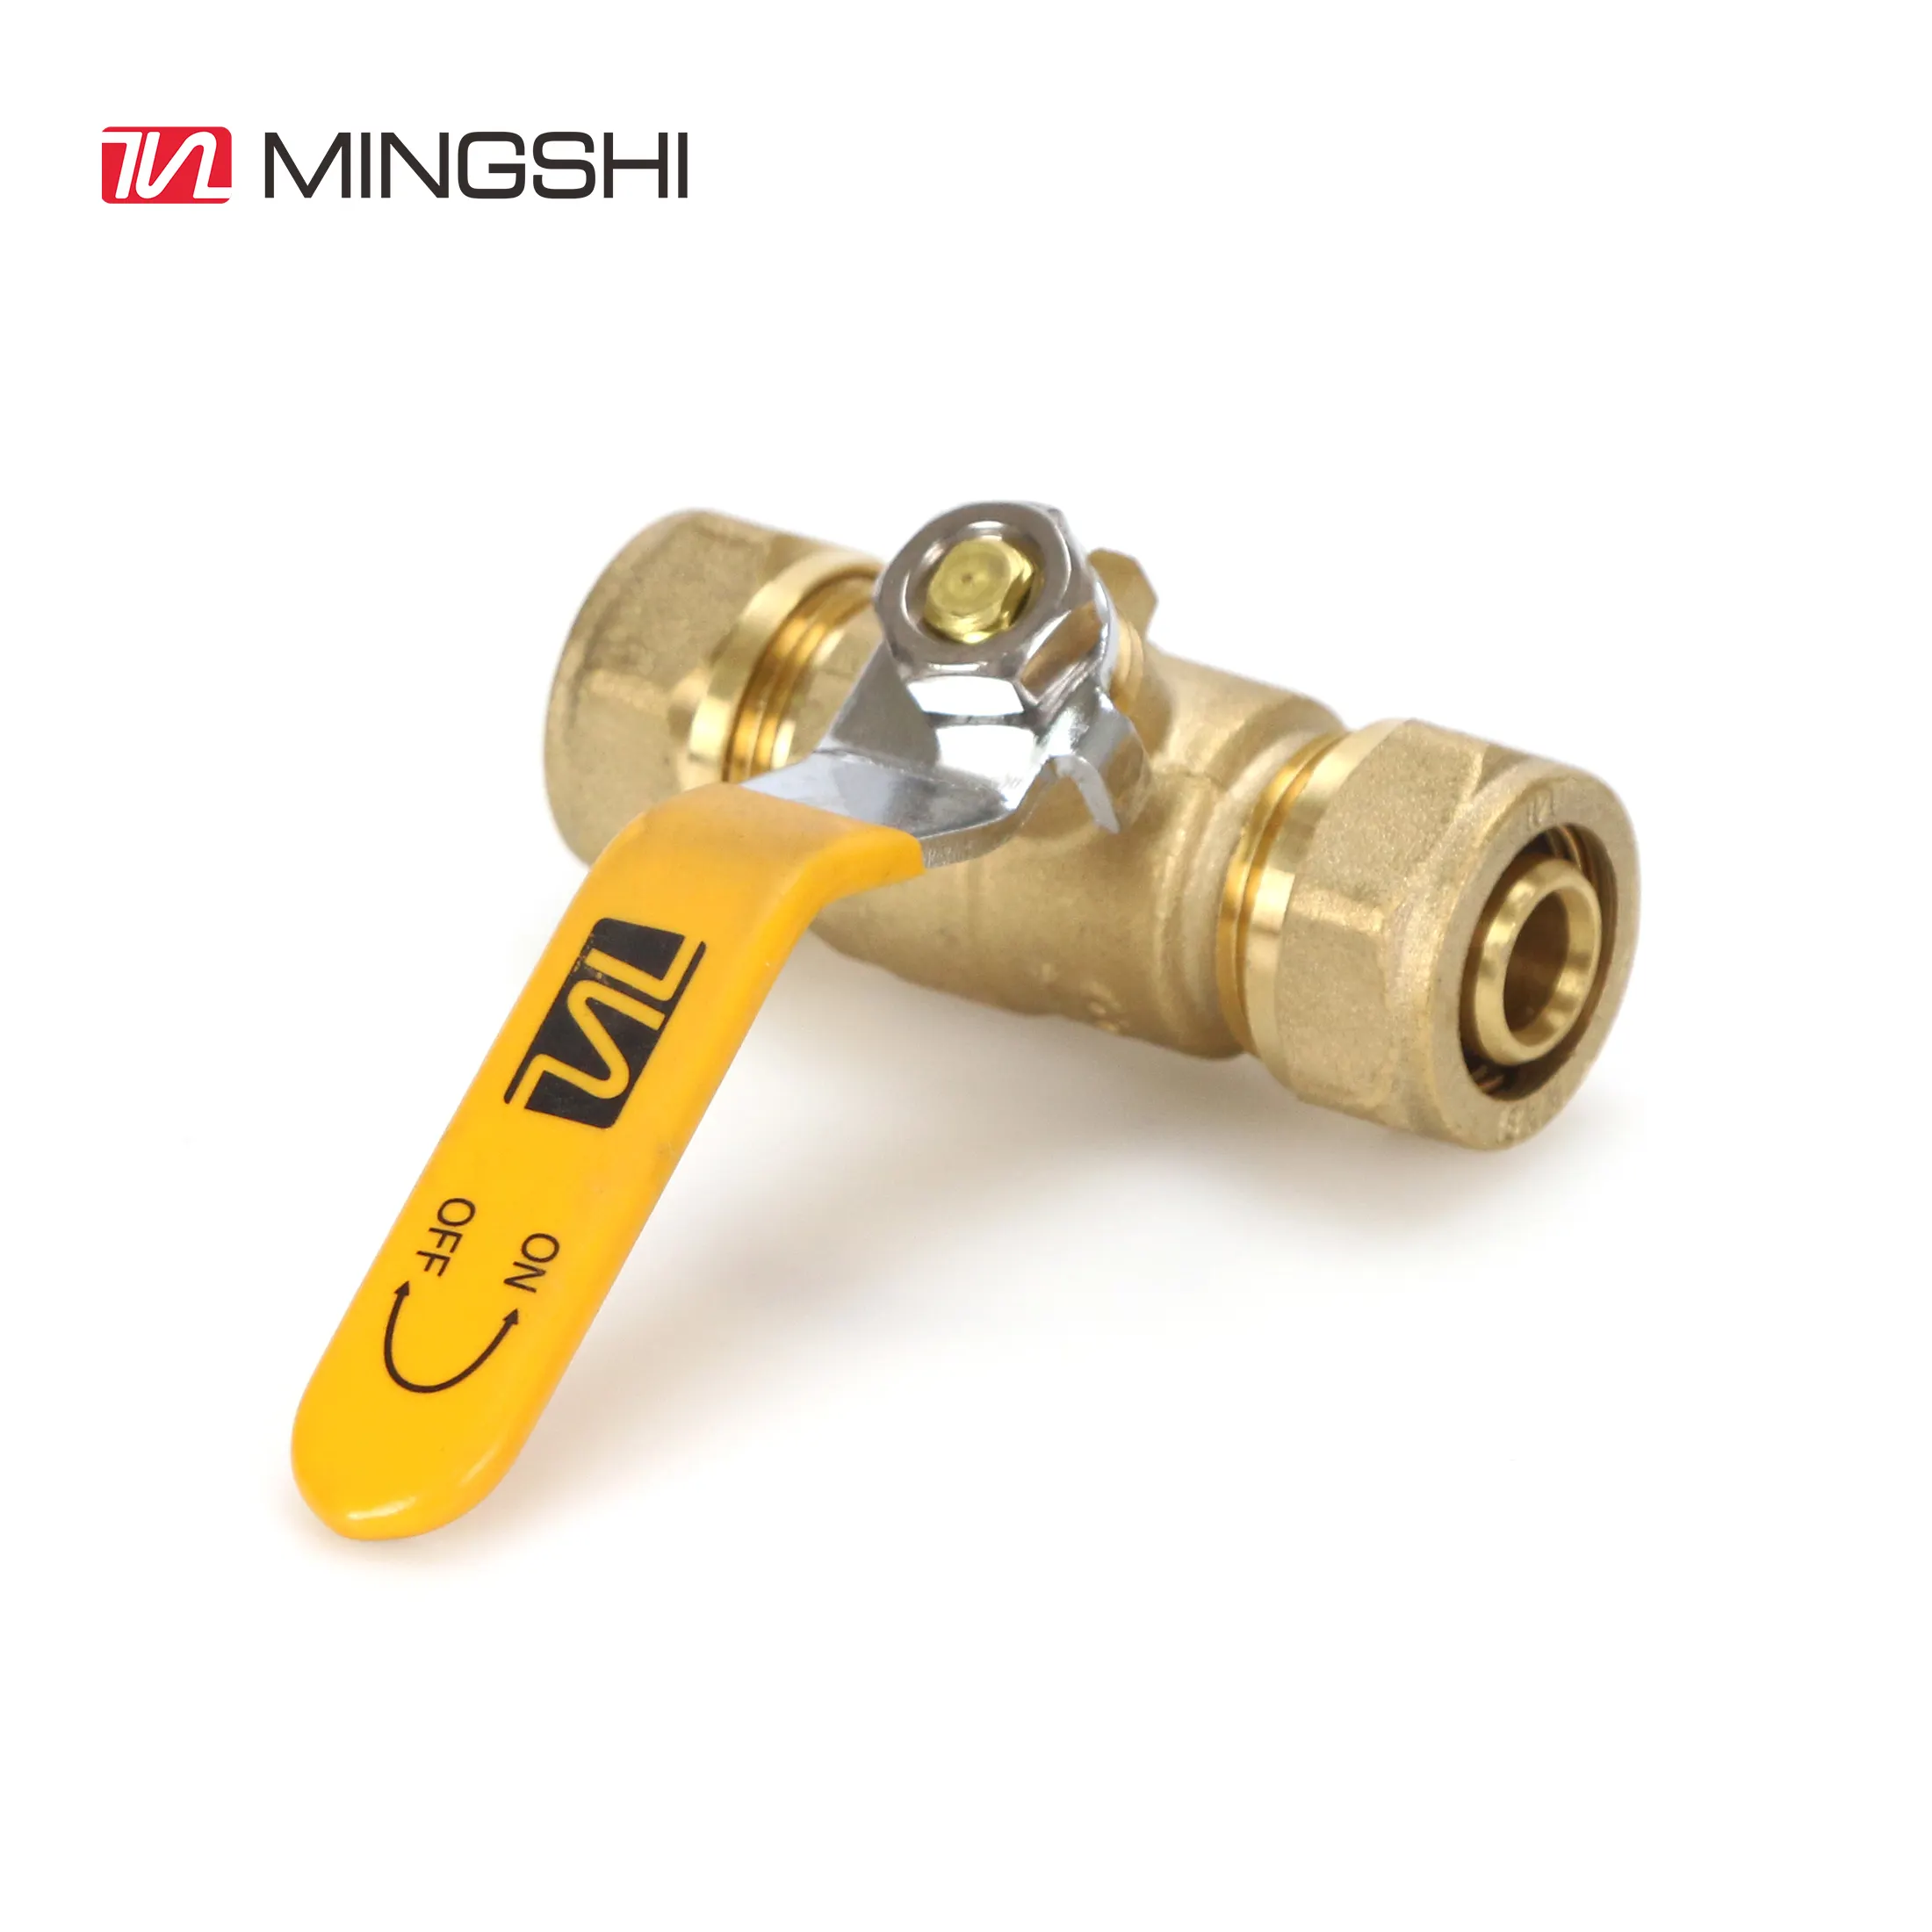 MINGSHI HVAC Press Compression Brass valves for Plumbing/gas for multilayer/ PEX pipes - valve fittings